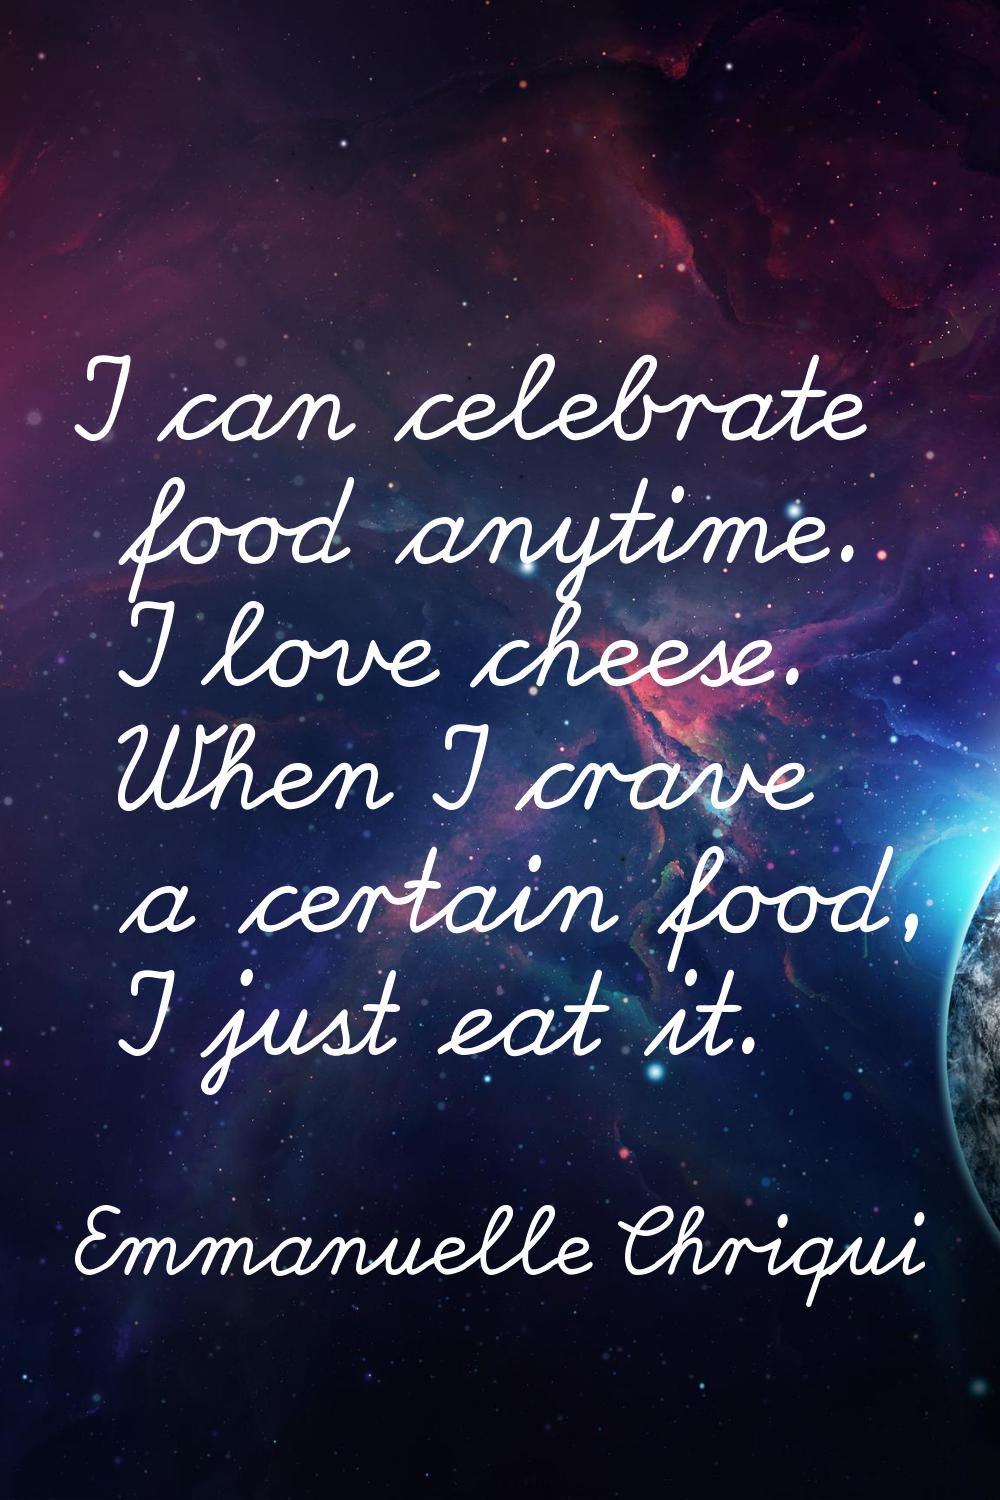 I can celebrate food anytime. I love cheese. When I crave a certain food, I just eat it.